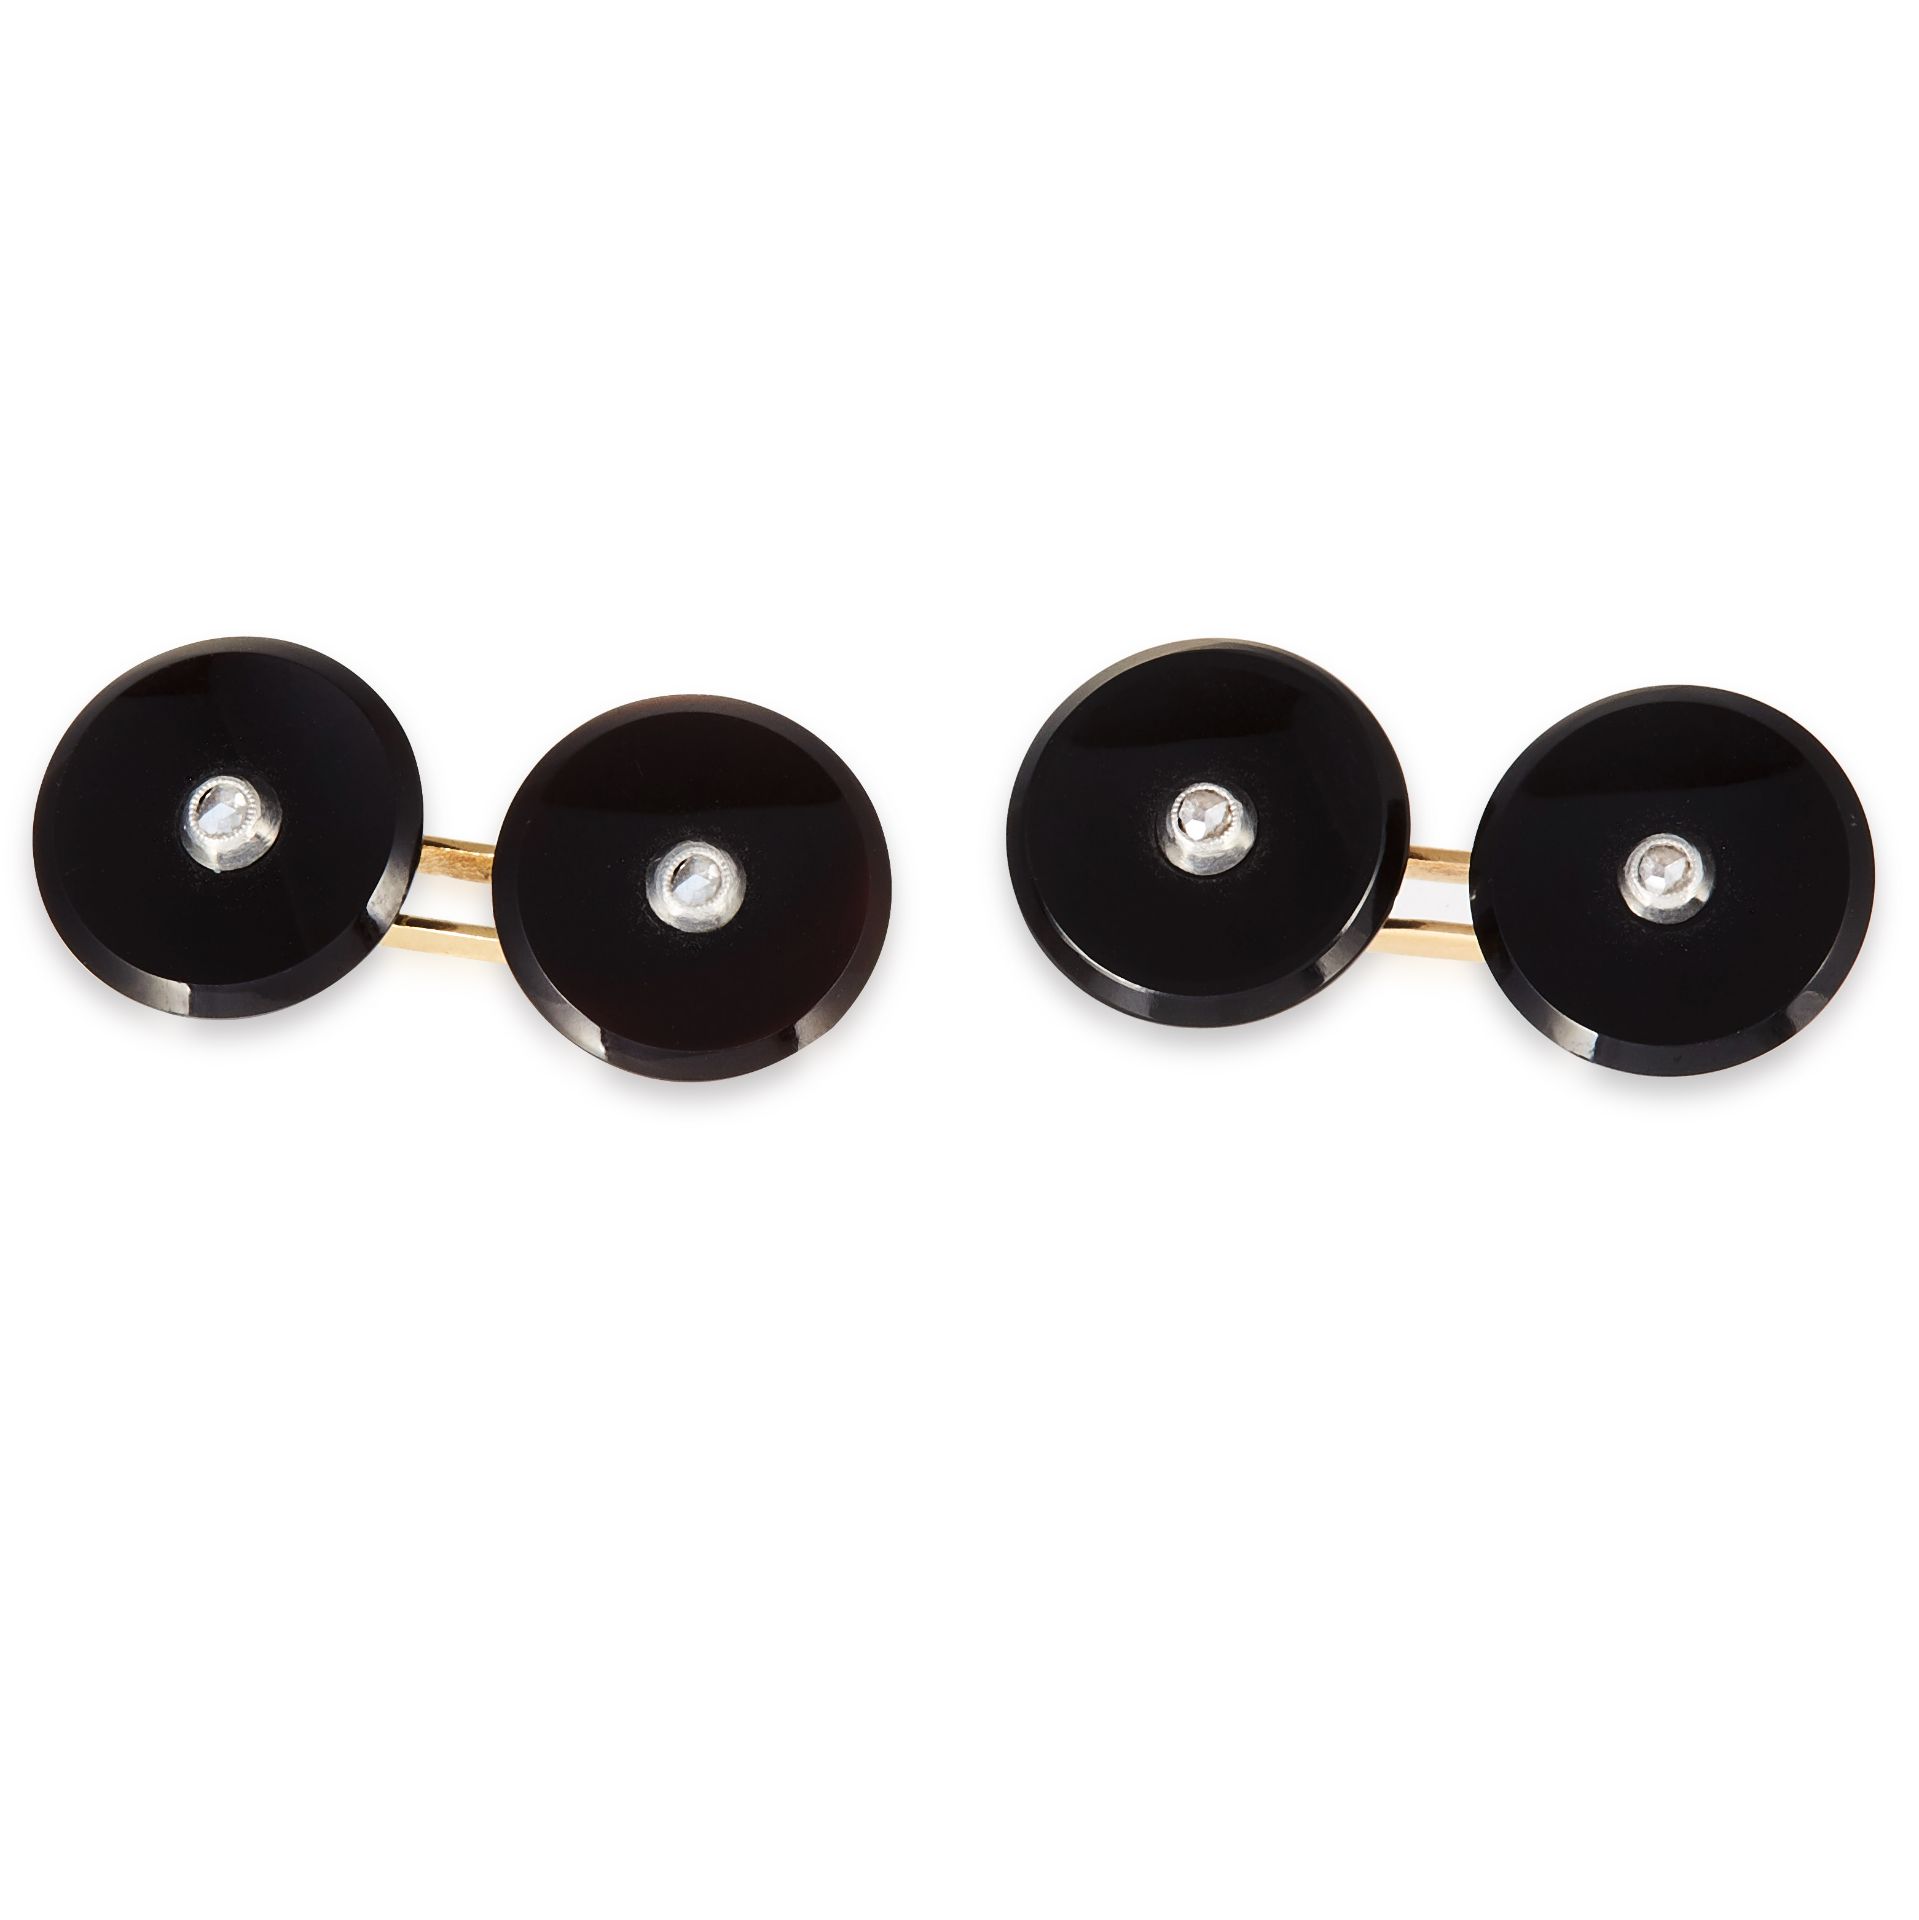 A PAIR OF ART DECO DIAMOND AND ONYX CUFFLINKS in yellow gold, each formed of two circular polished